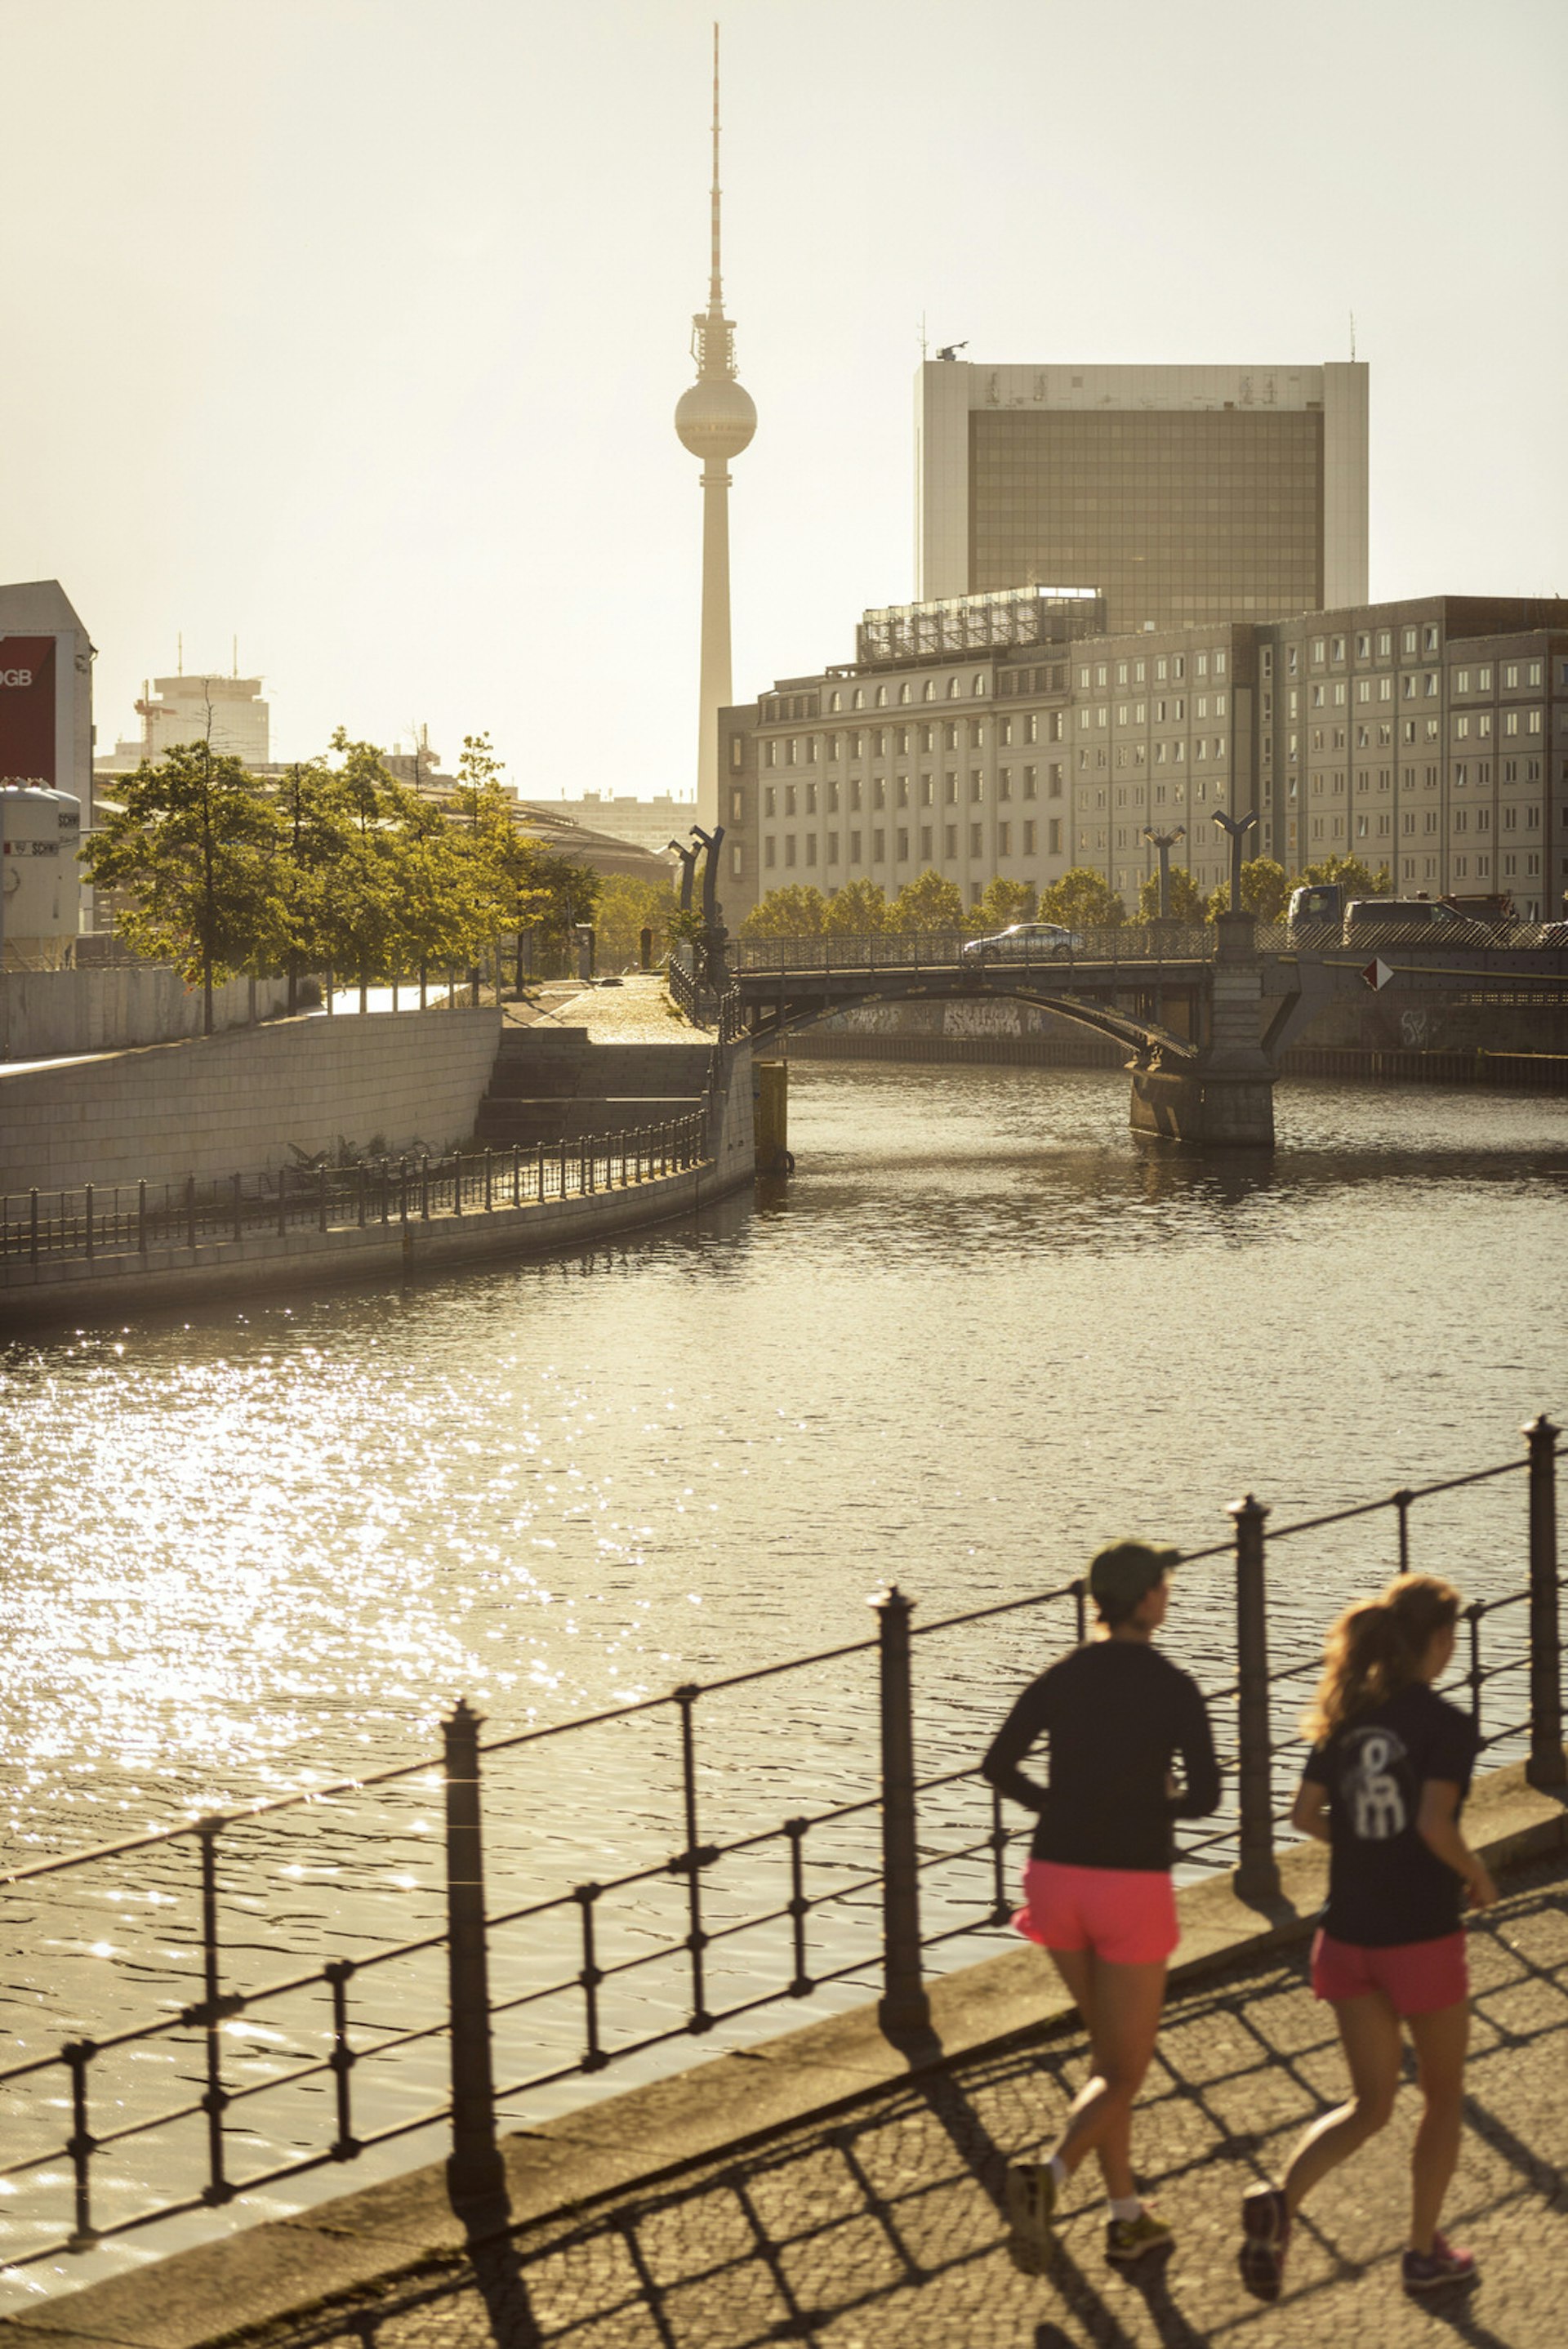 Two people are running at sunset along the paved bank of the hemmed in Spree River in Berlin, with the ever-present TV Tower looming in the distance